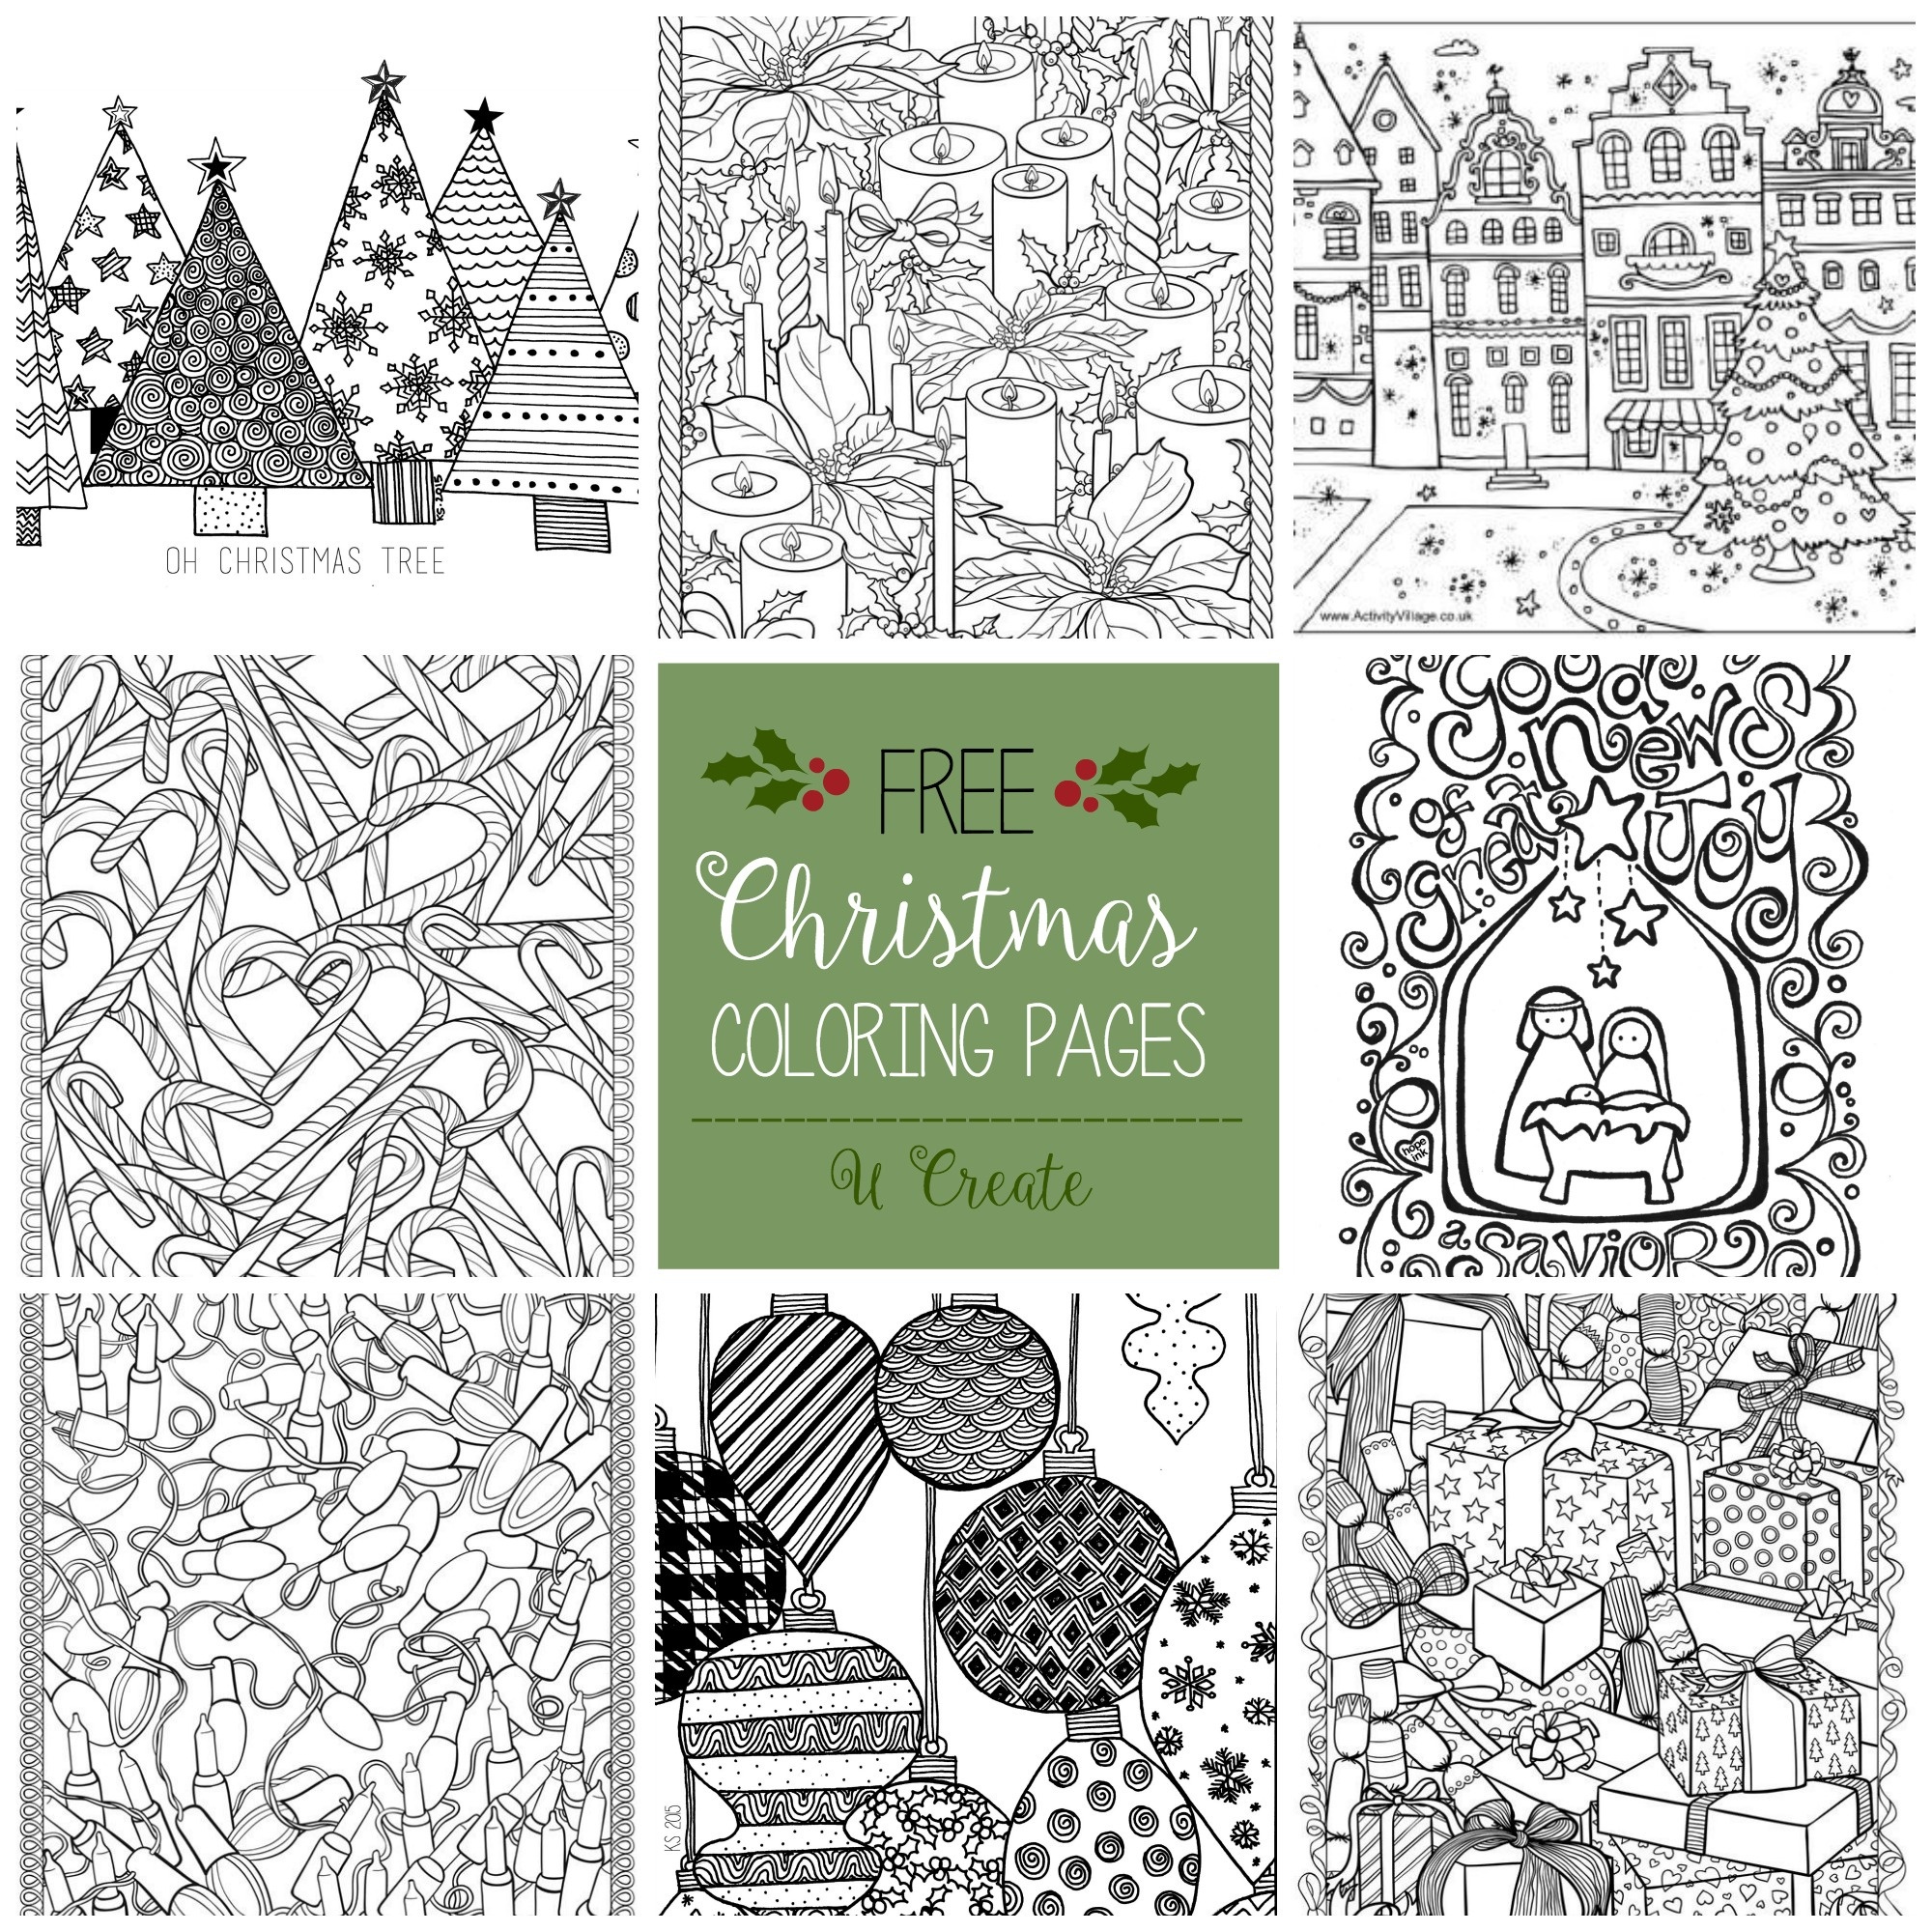 Free Christmas Adult Coloring Pages - U Create - Free Printable Christmas Coloring Sheets